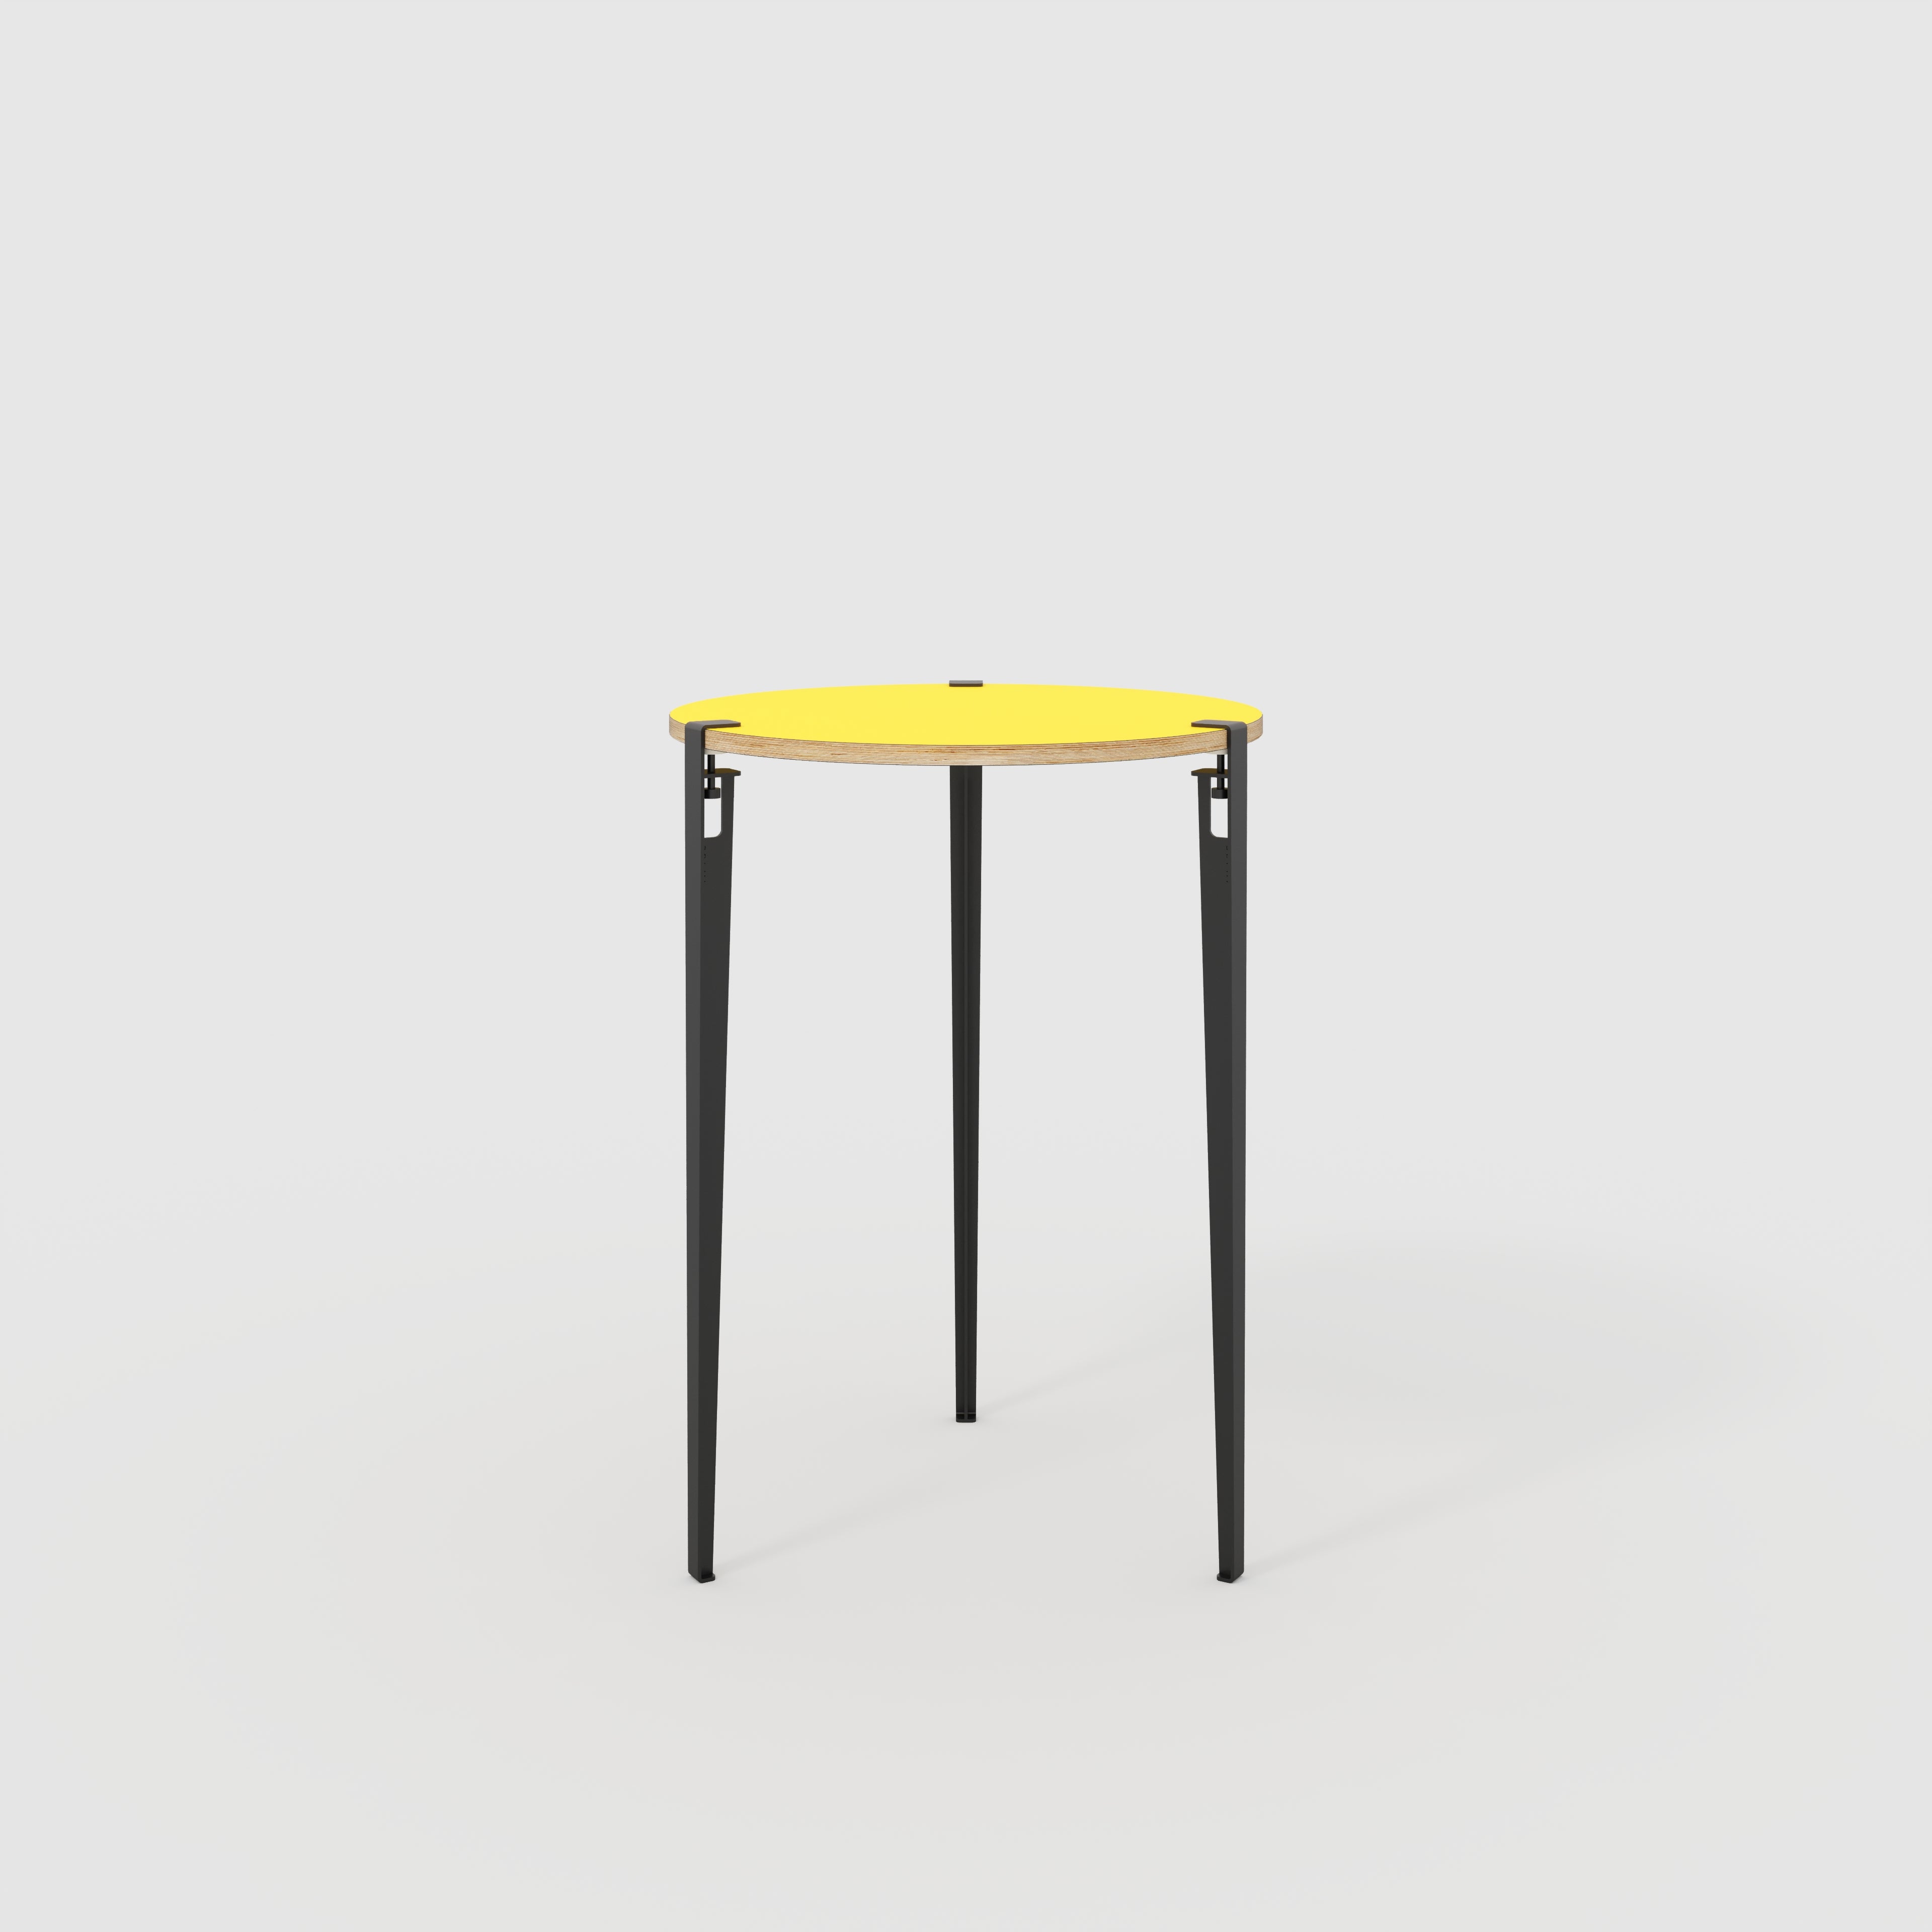 Round Table with Black Tiptoe Legs - Formica Chrome Yellow - 800(dia) x 1100(h)